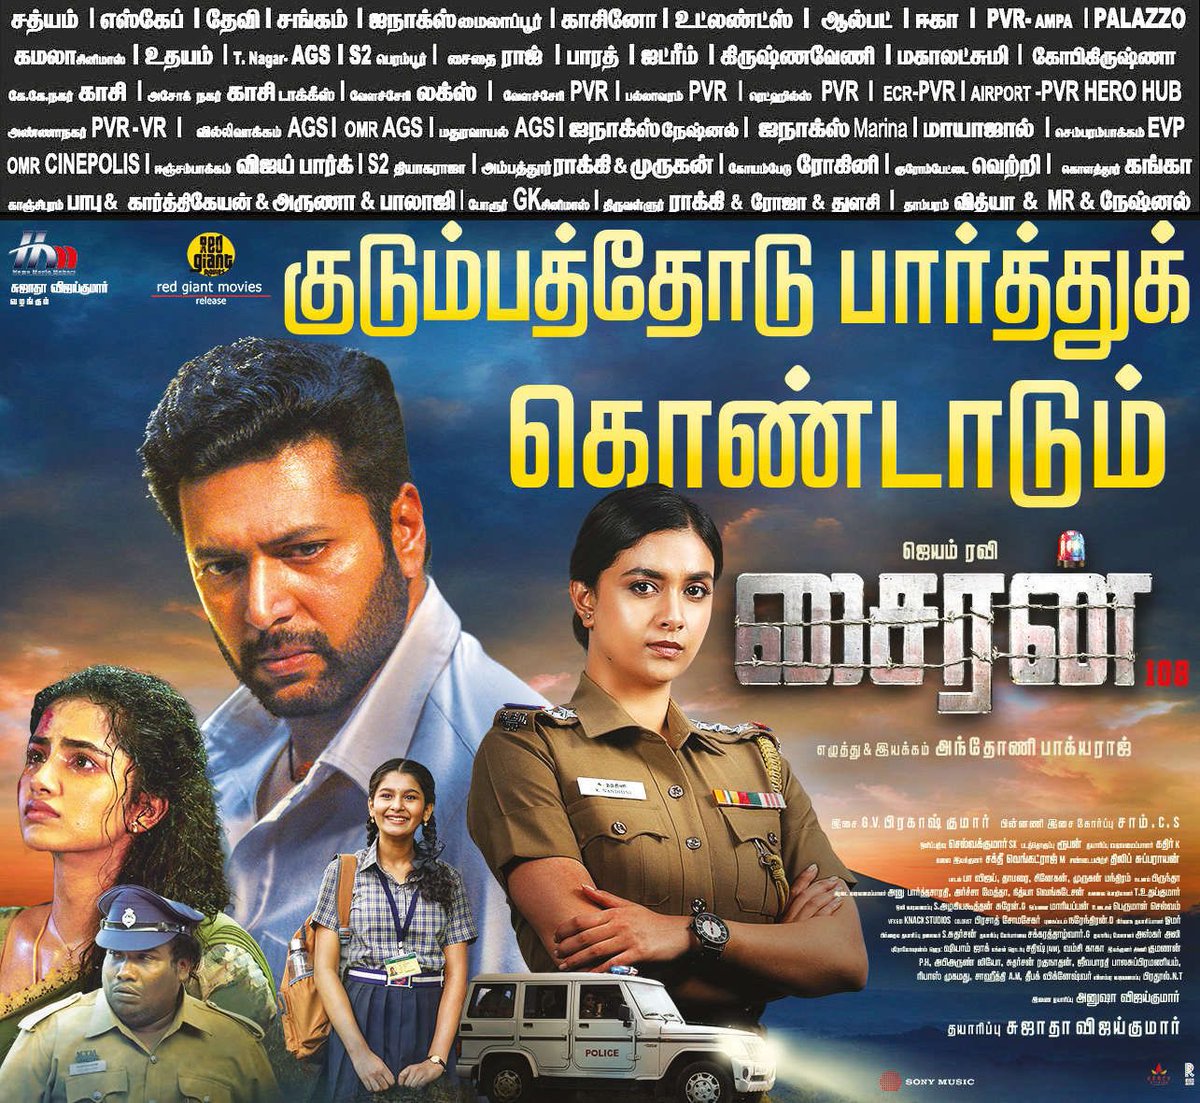 With the great response from Family audience @actor_jayamravi's #Siren is now running successfully in theatres !! TN theatrical release by @RedGiantMovies_ A @gvprakash Musical Written & Directed by @antonybhagyaraj @KeerthyOfficial @anupamahere @SamCSmusic @sujataa_HMM…